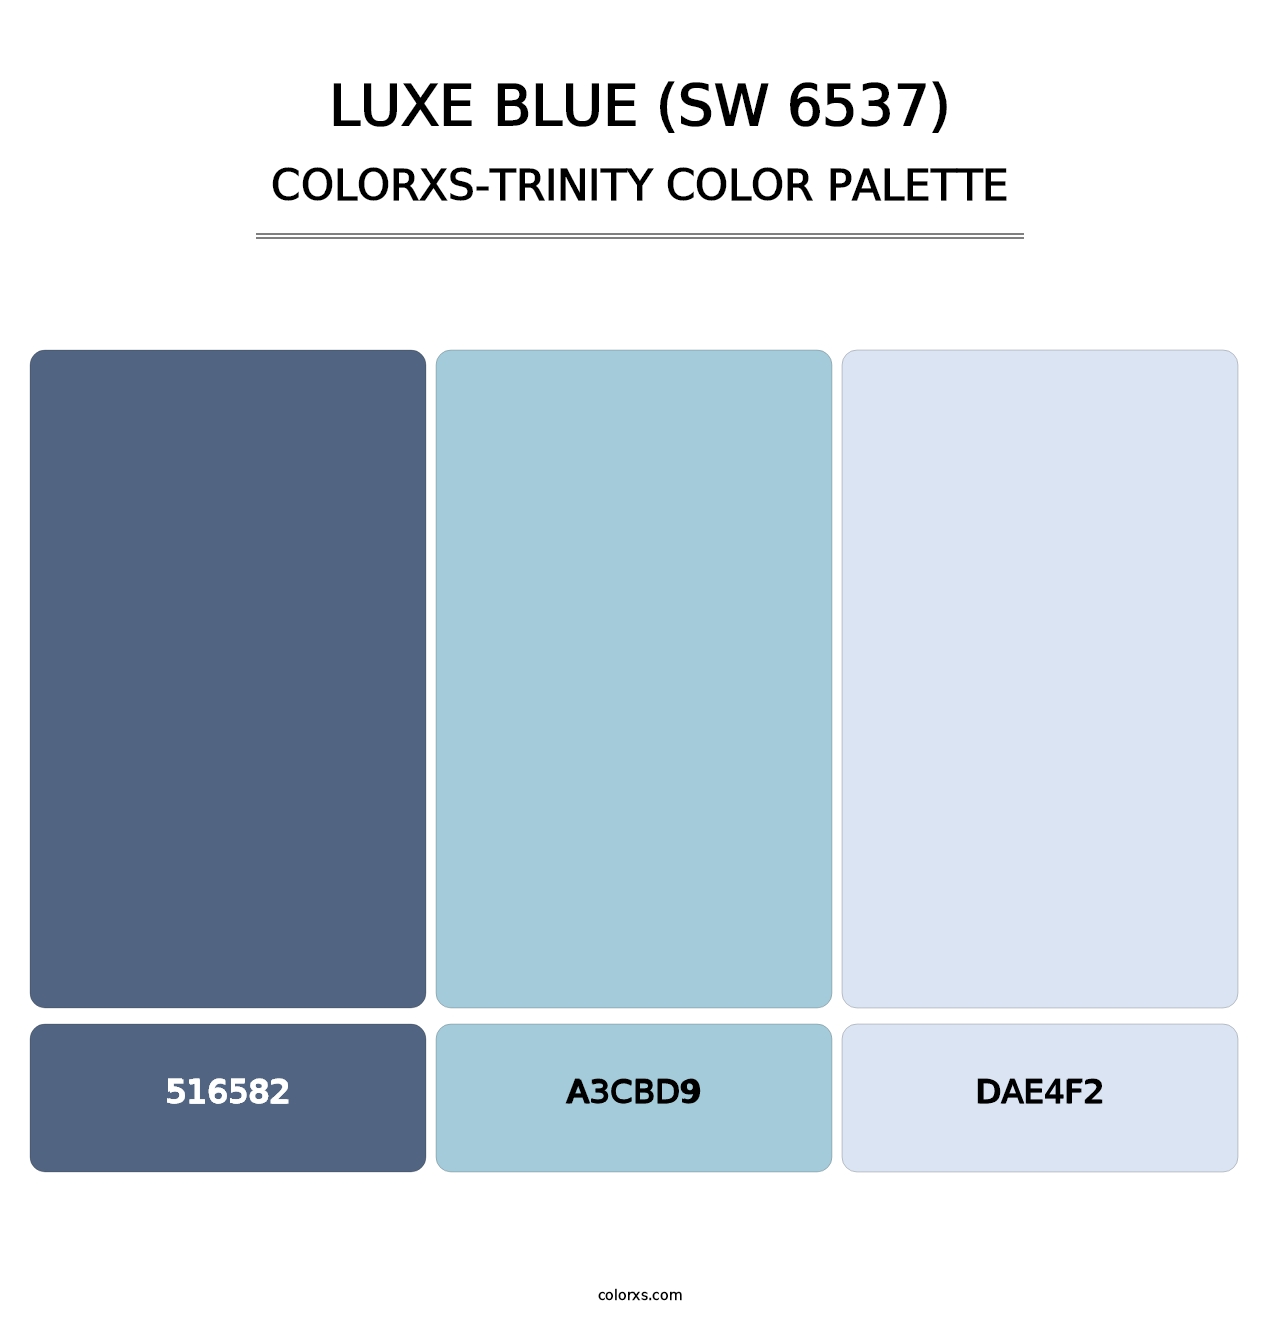 Luxe Blue (SW 6537) - Colorxs Trinity Palette